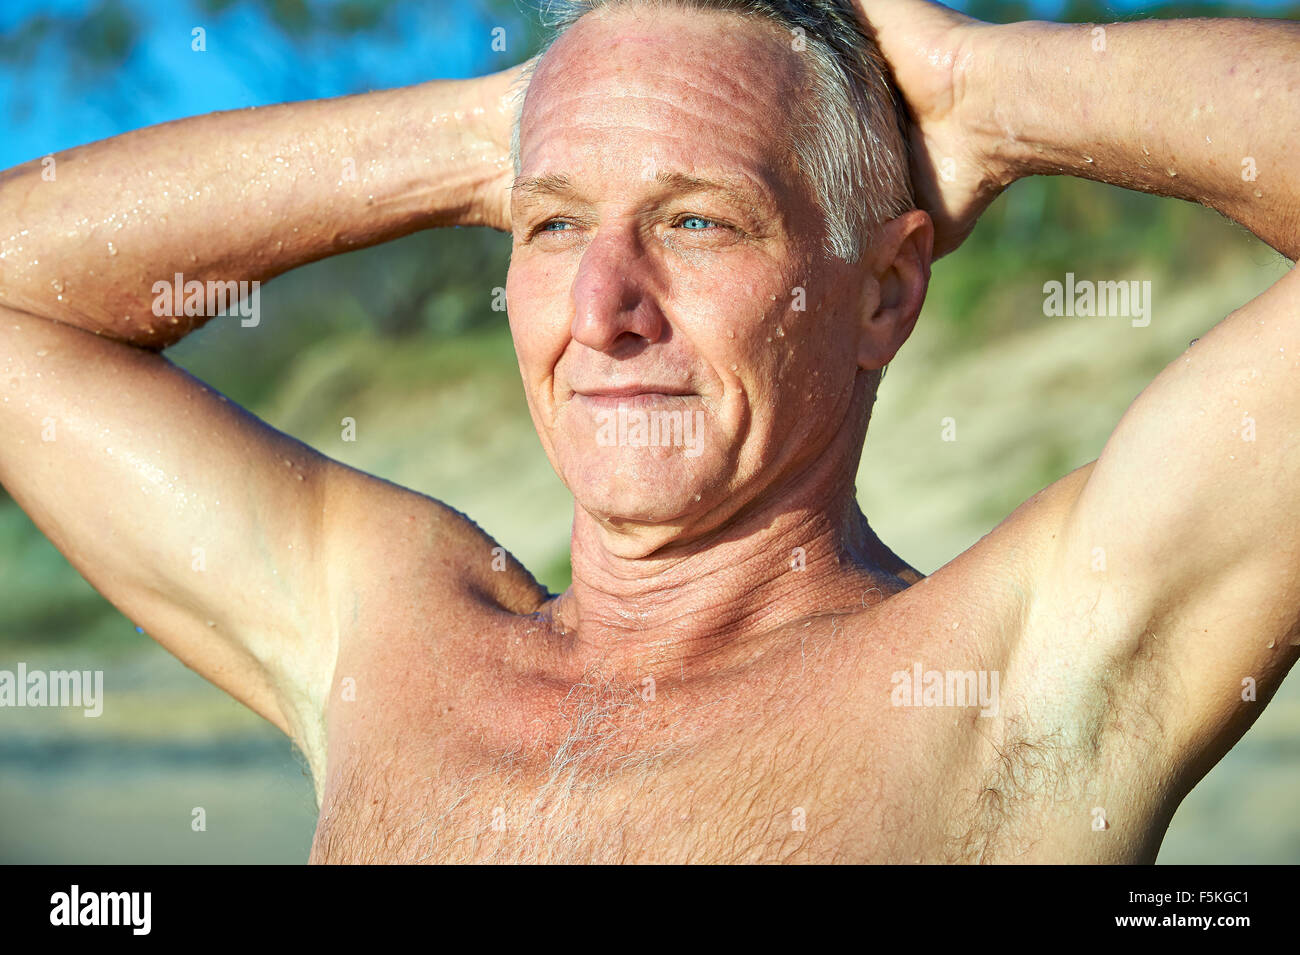 Head and shoulder portrait of a mature aged man smiling with sand dunes and tree in the background Stock Photo